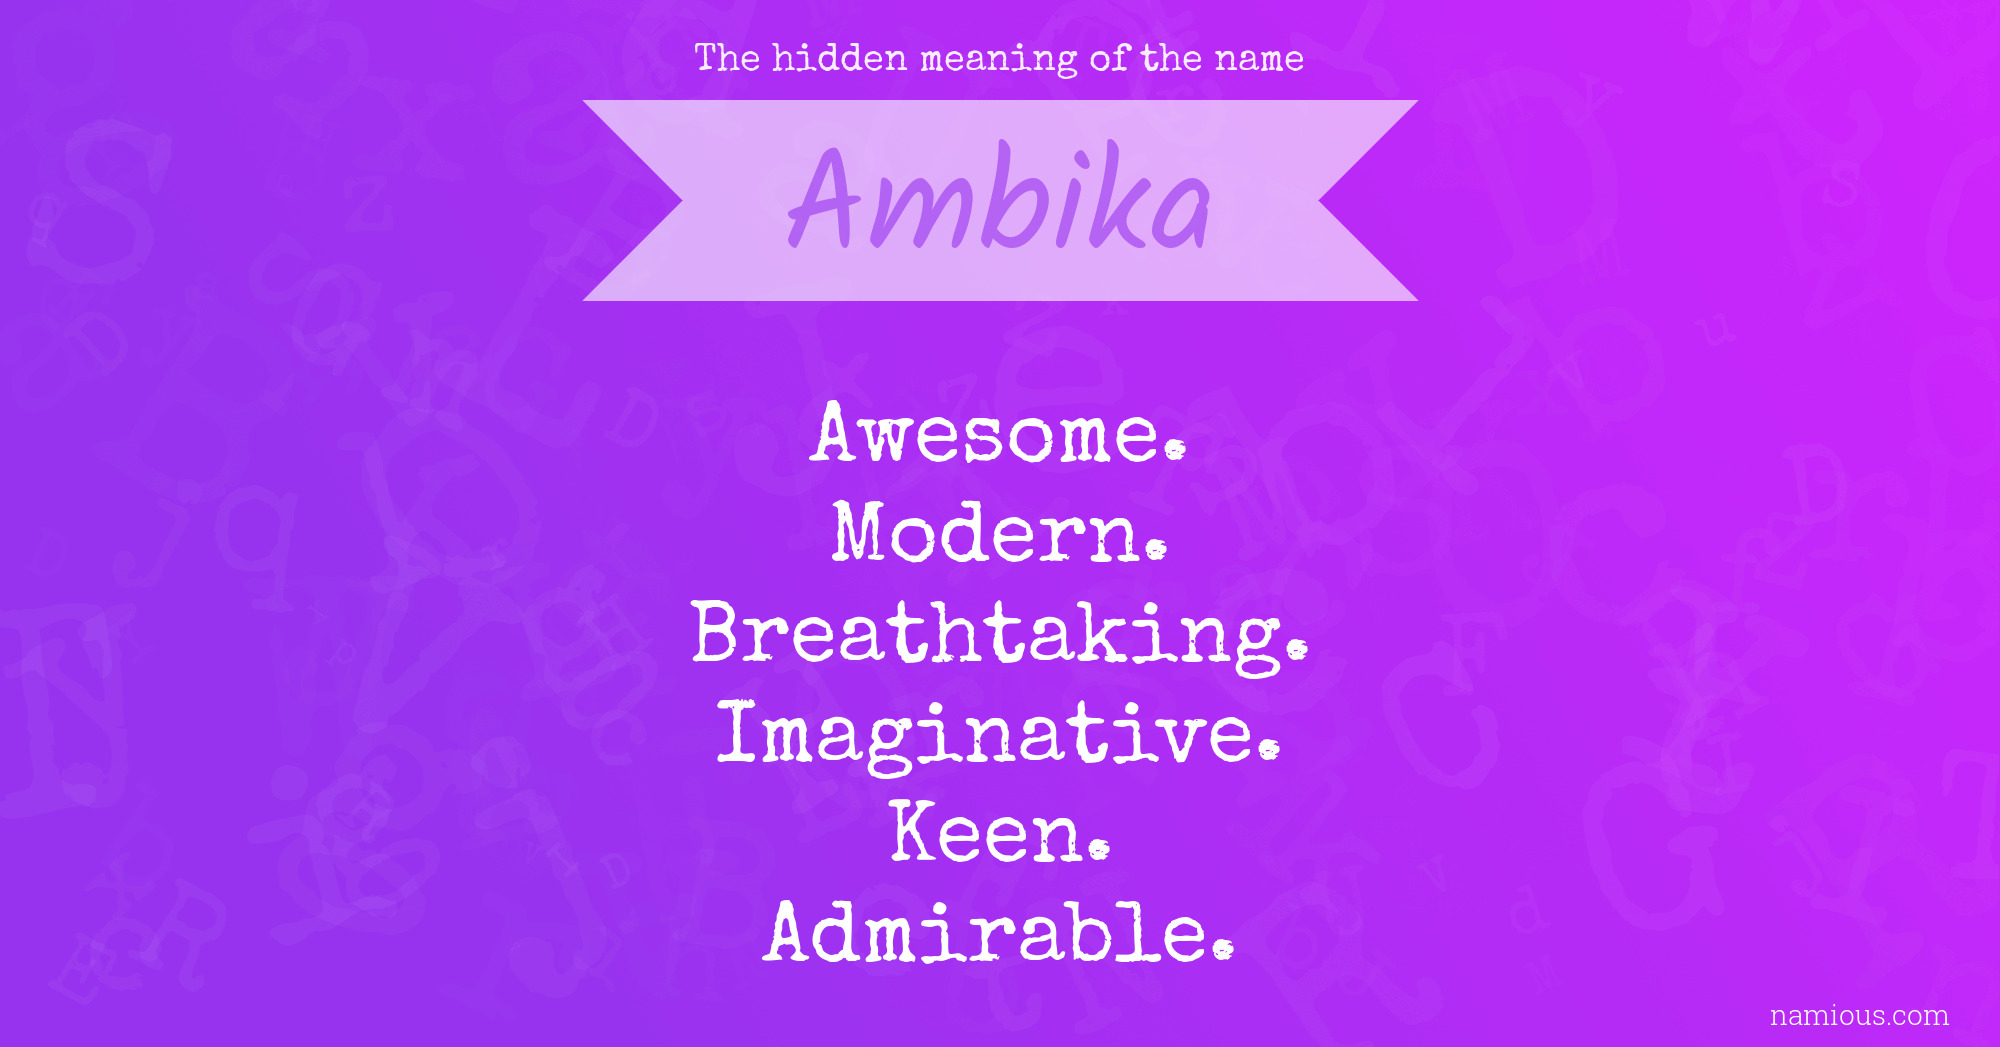 The hidden meaning of the name Ambika